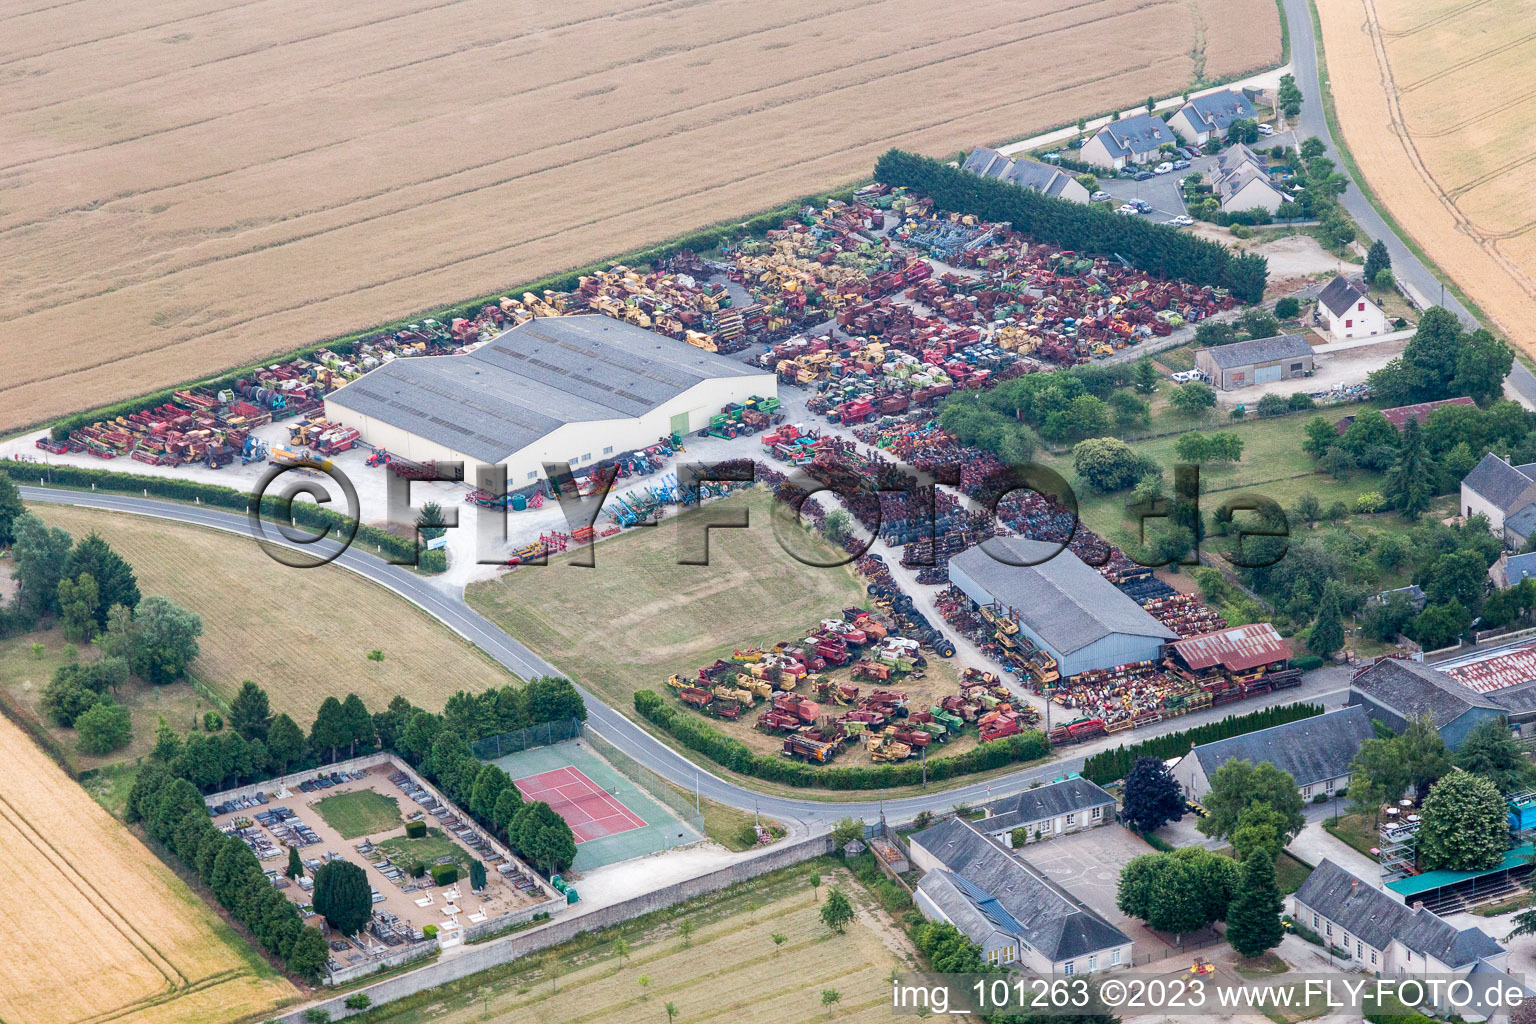 Drone image of Talcy in the state Loir et Cher, France